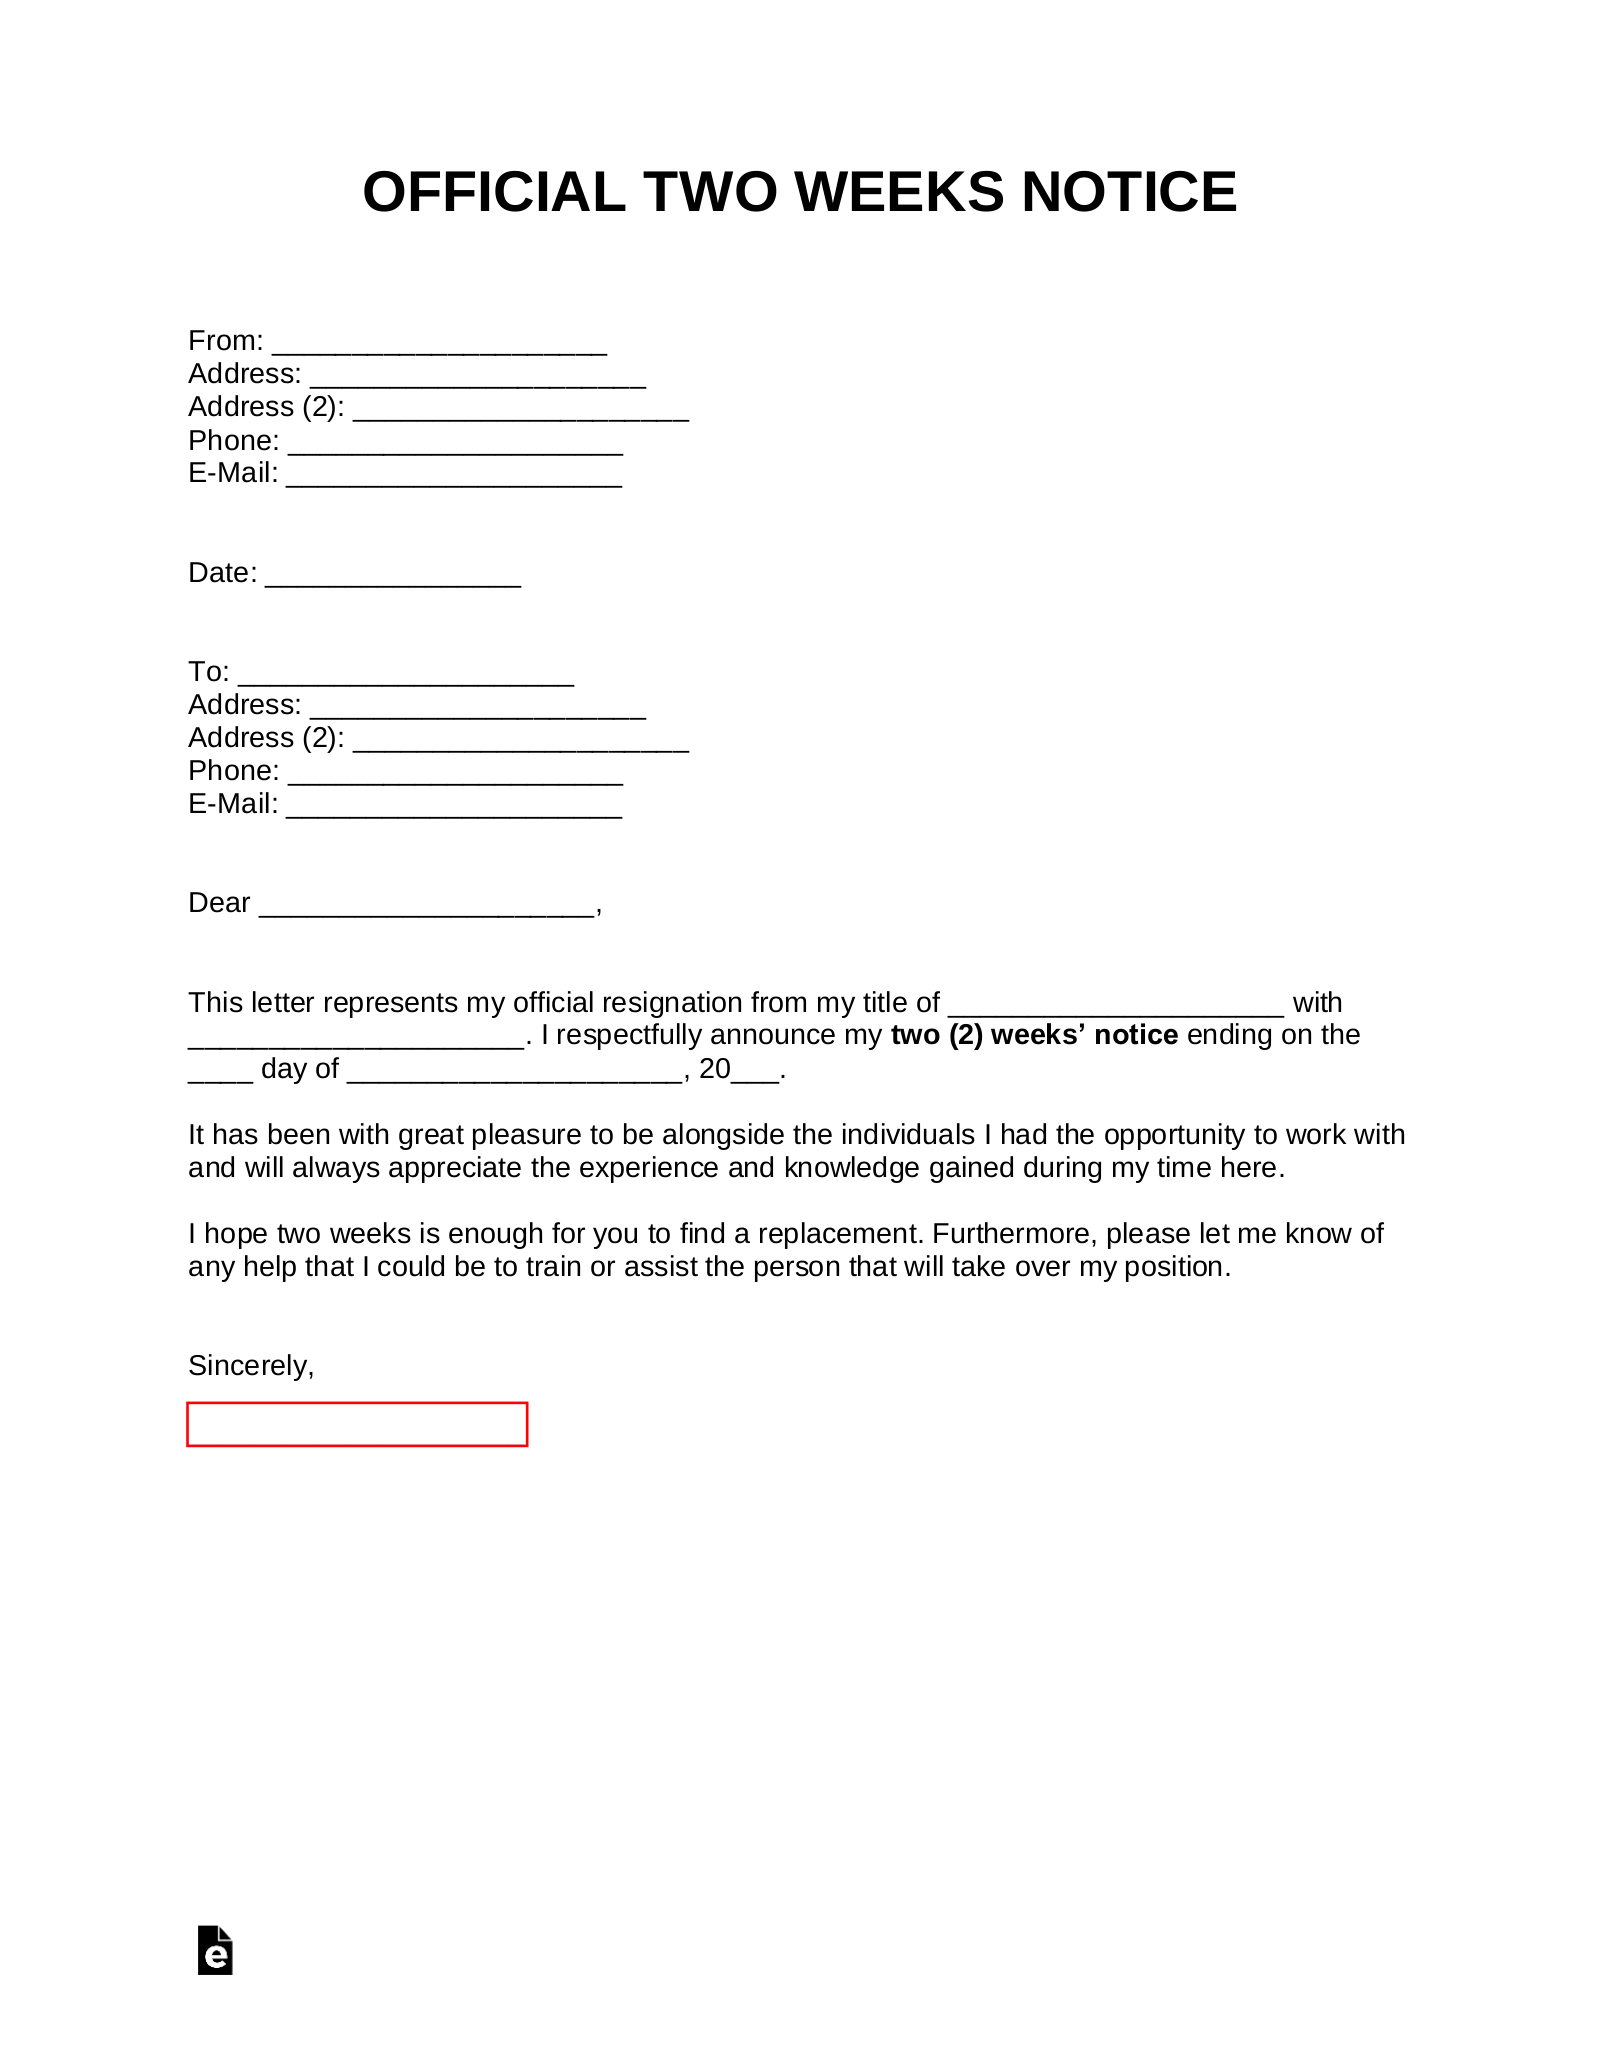 sample of 1 week notice resignation letter template